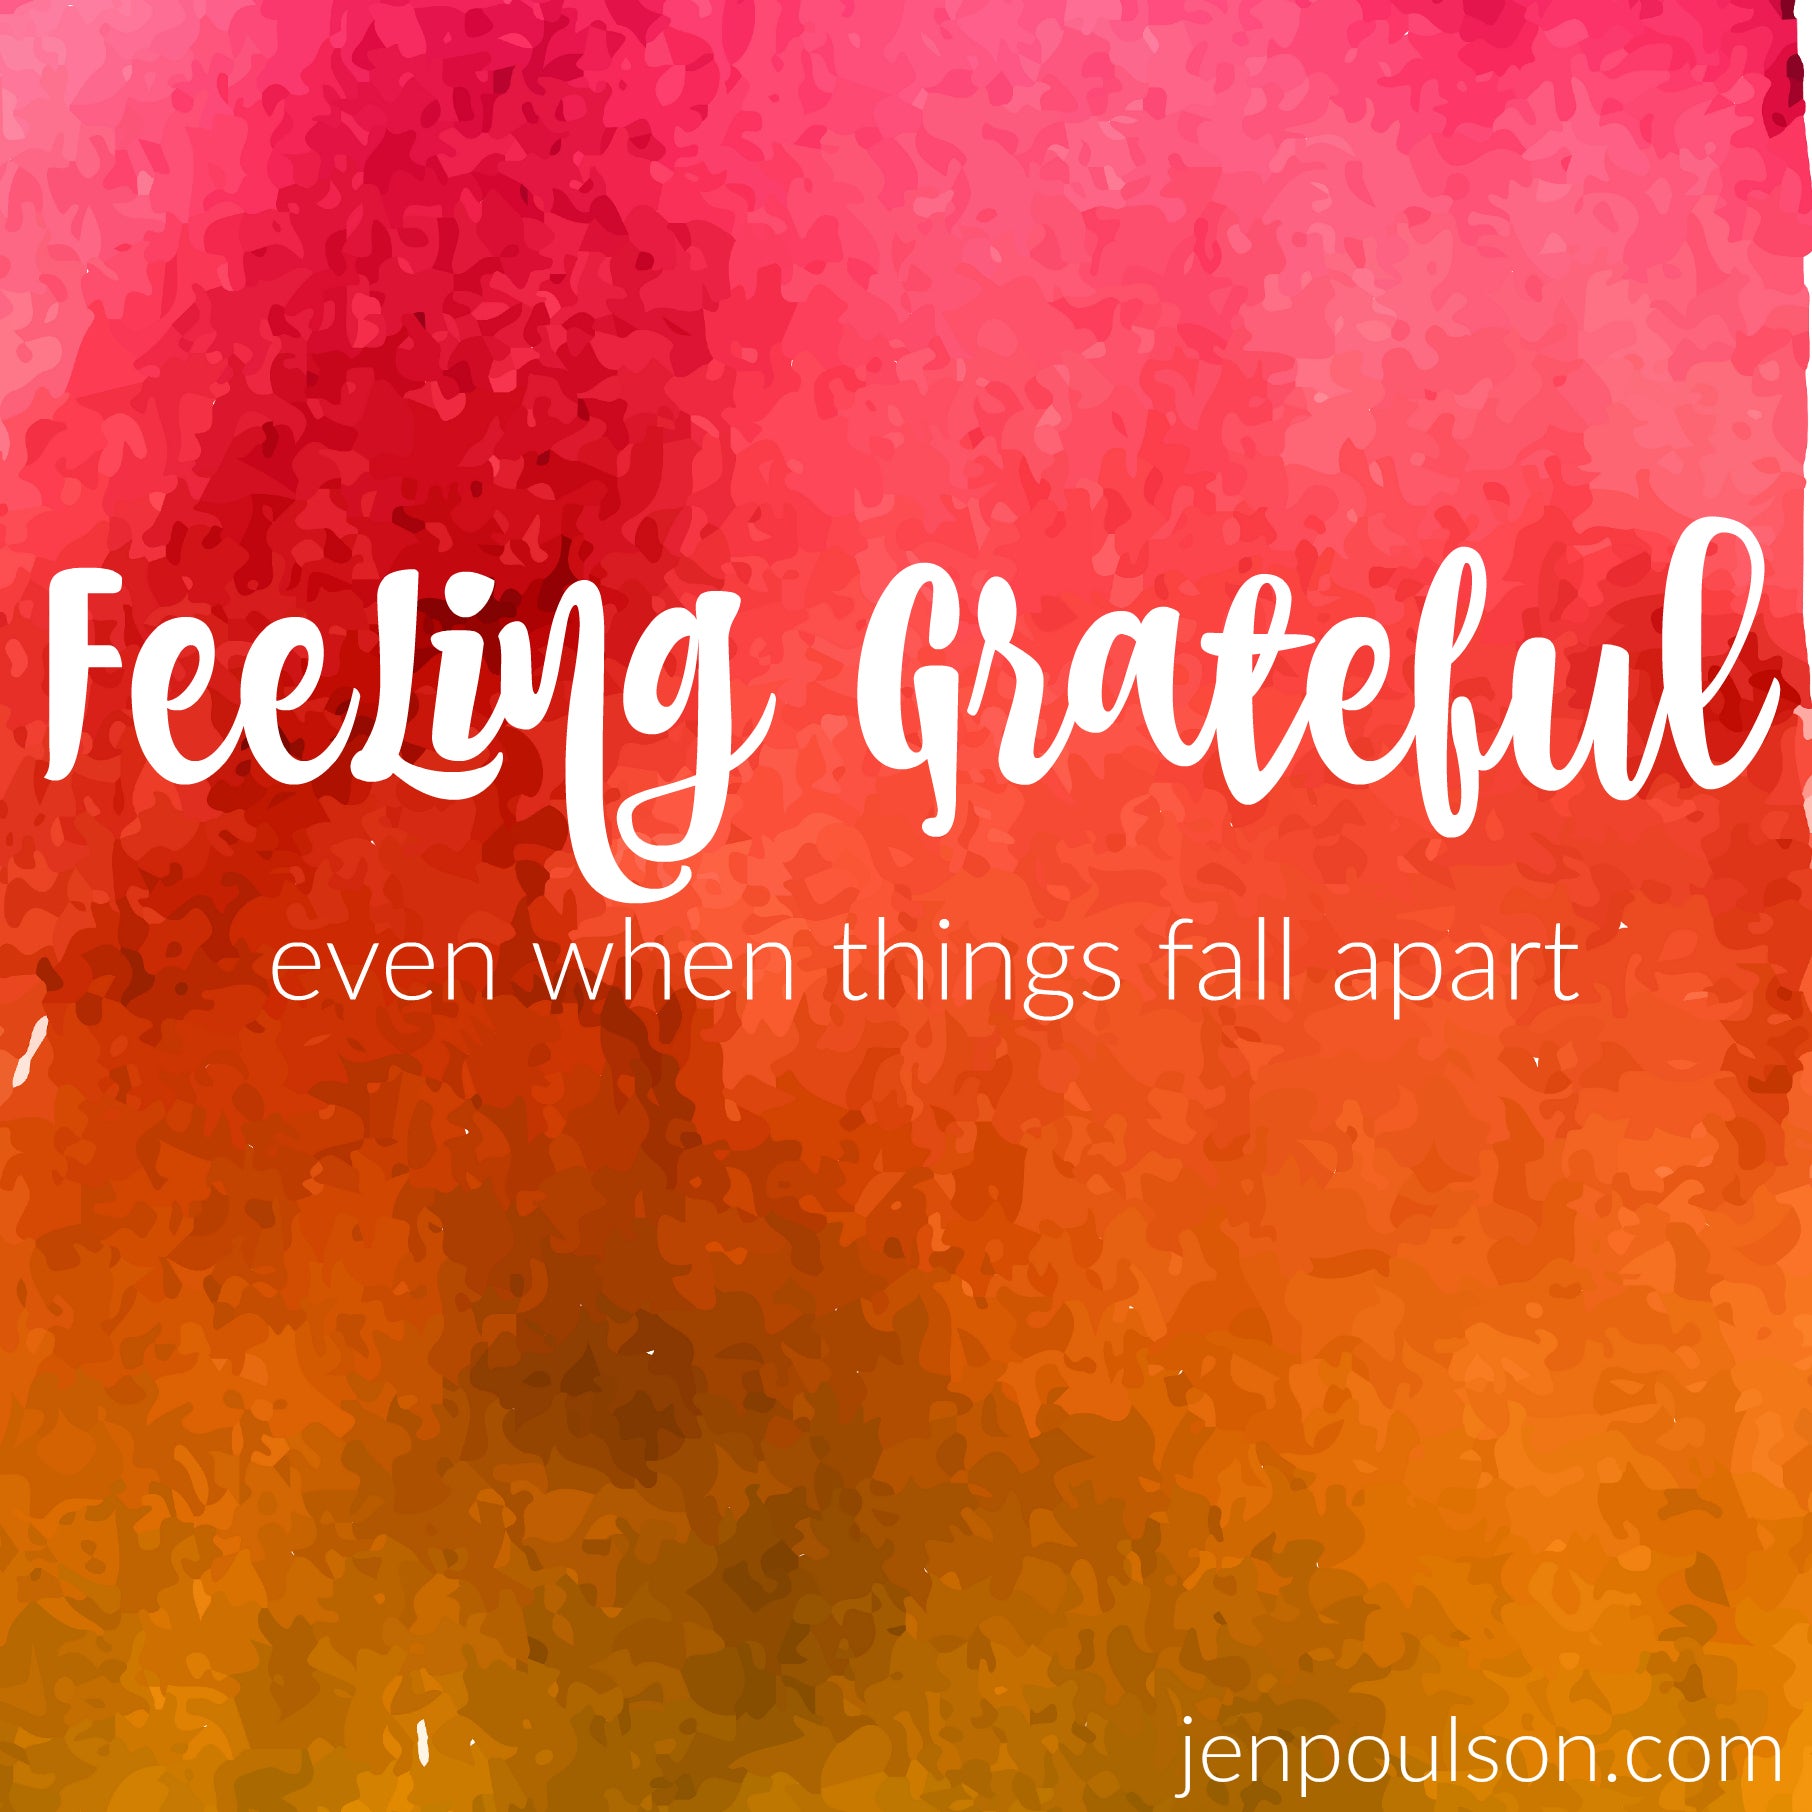 Feeling grateful even when things fall apart